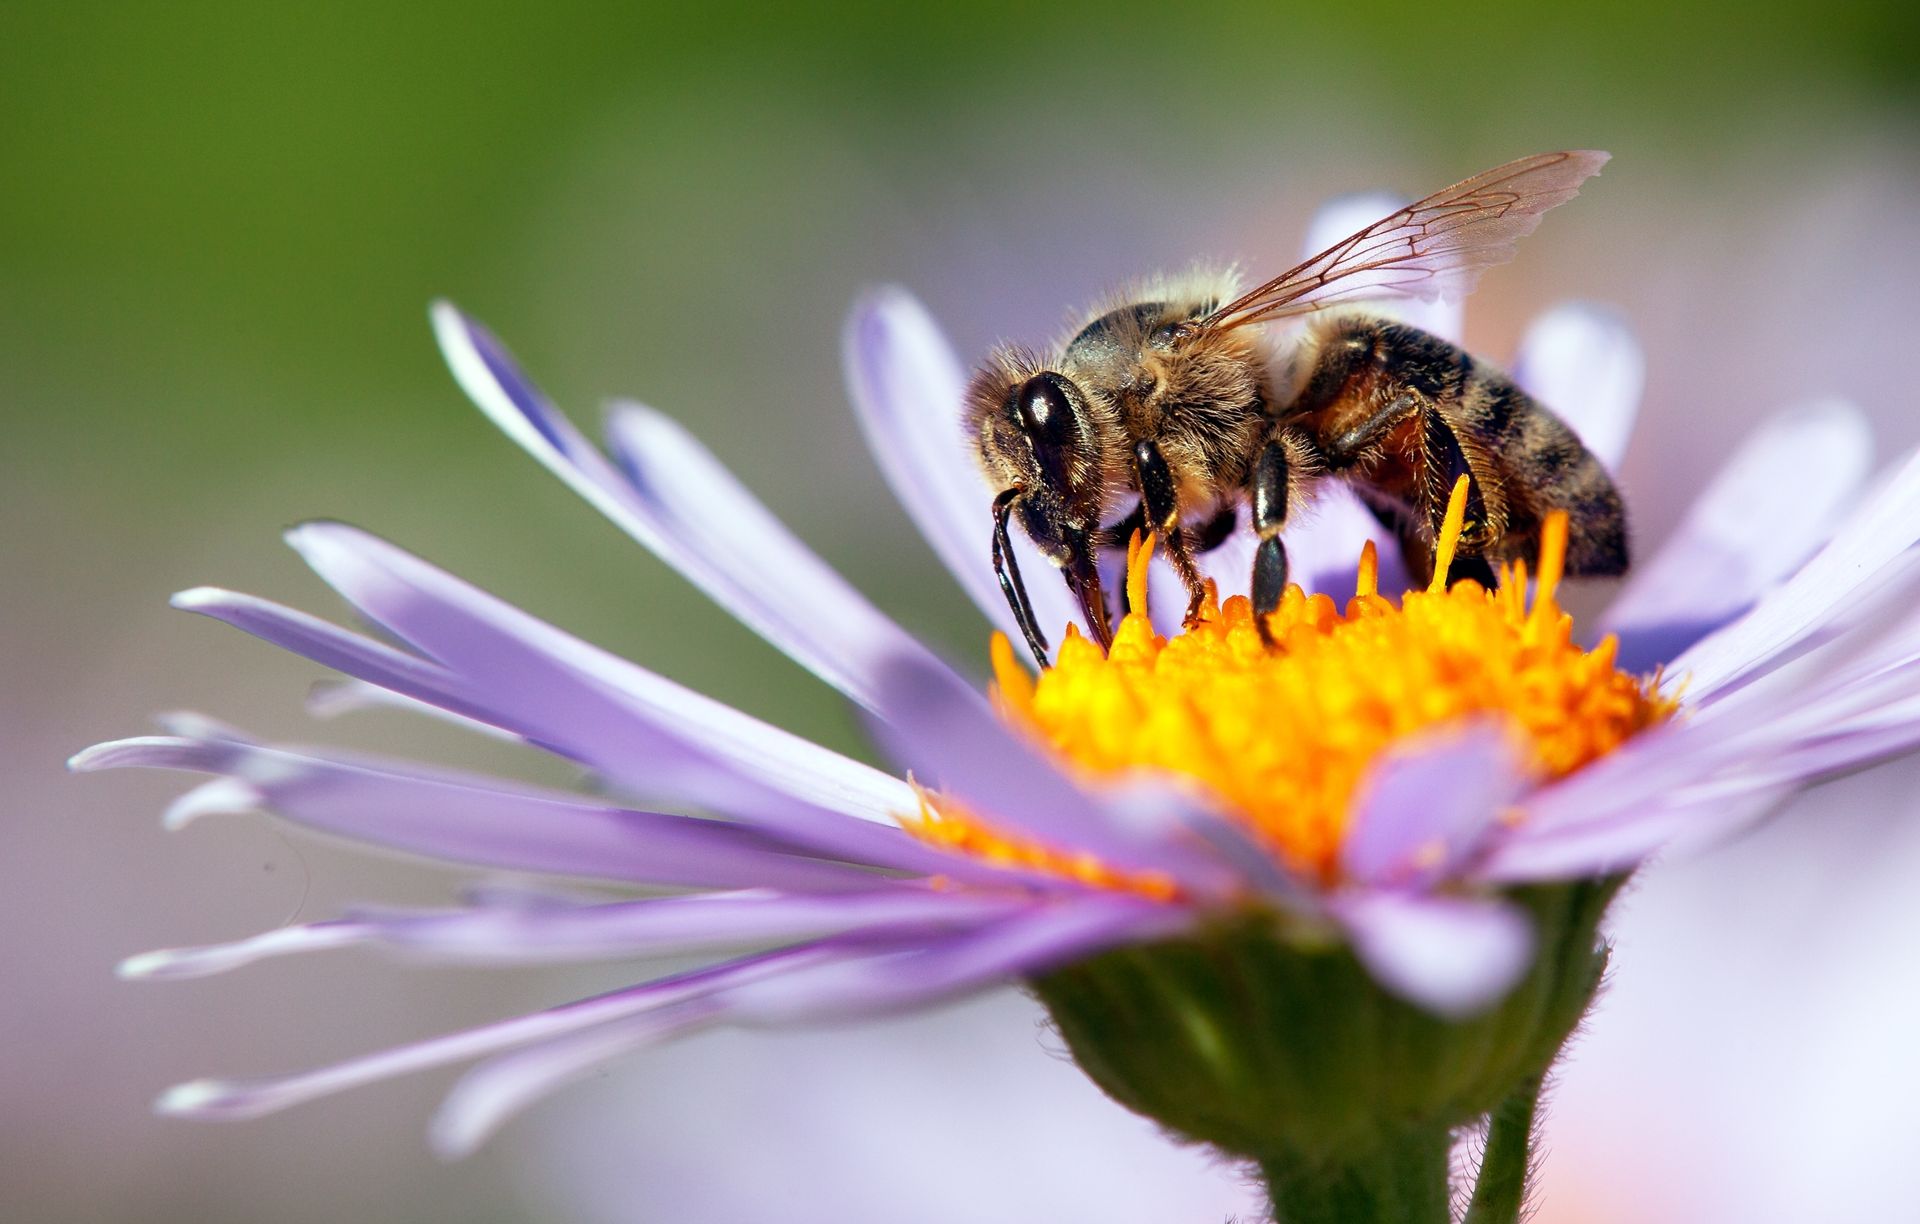 IV. Factors Affecting Bee Pollination